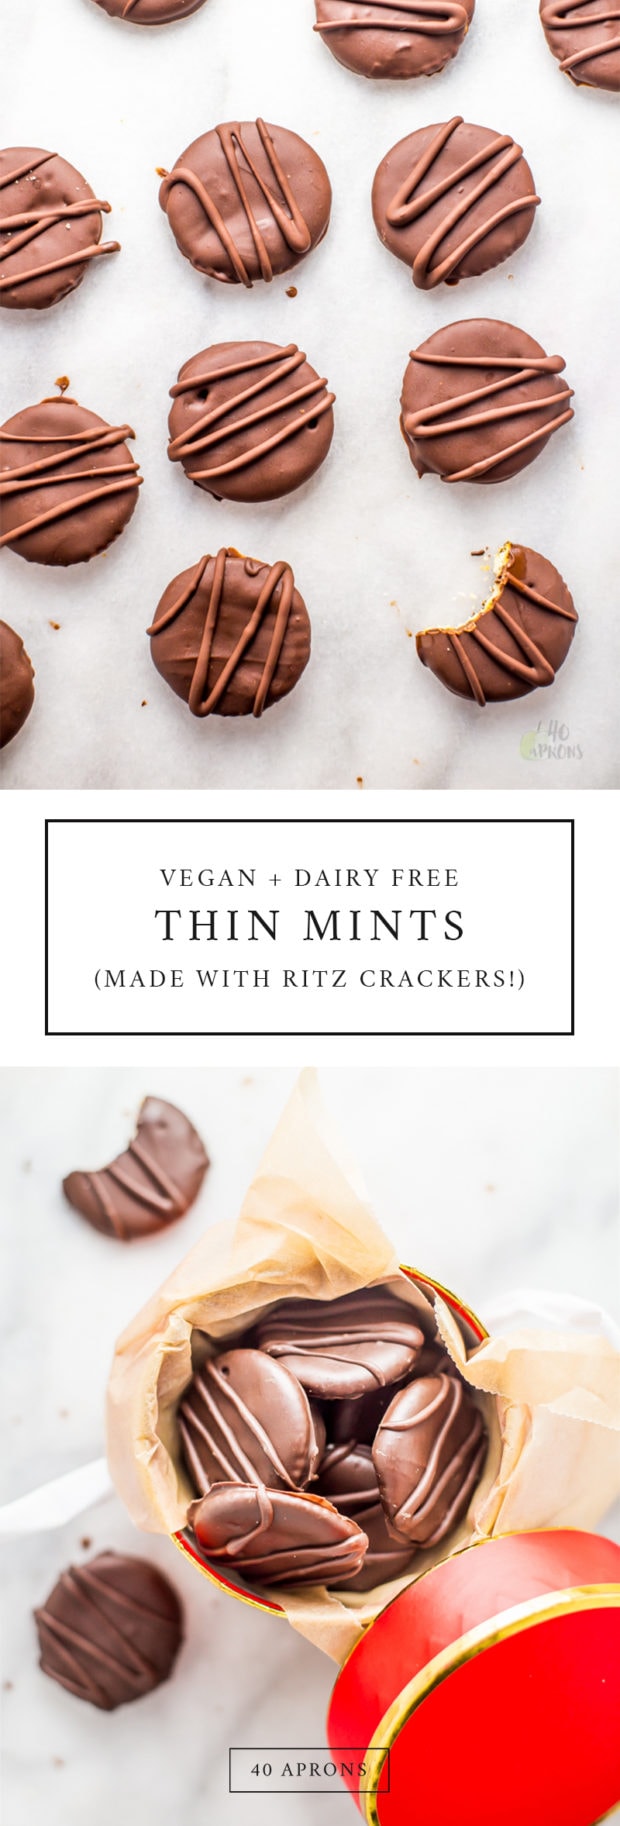 Vegan Thin Mints made with RITZ Crackers are the perfect dairy-free dessert or vegan Christmas cookie. So easy, quick, and delicious!